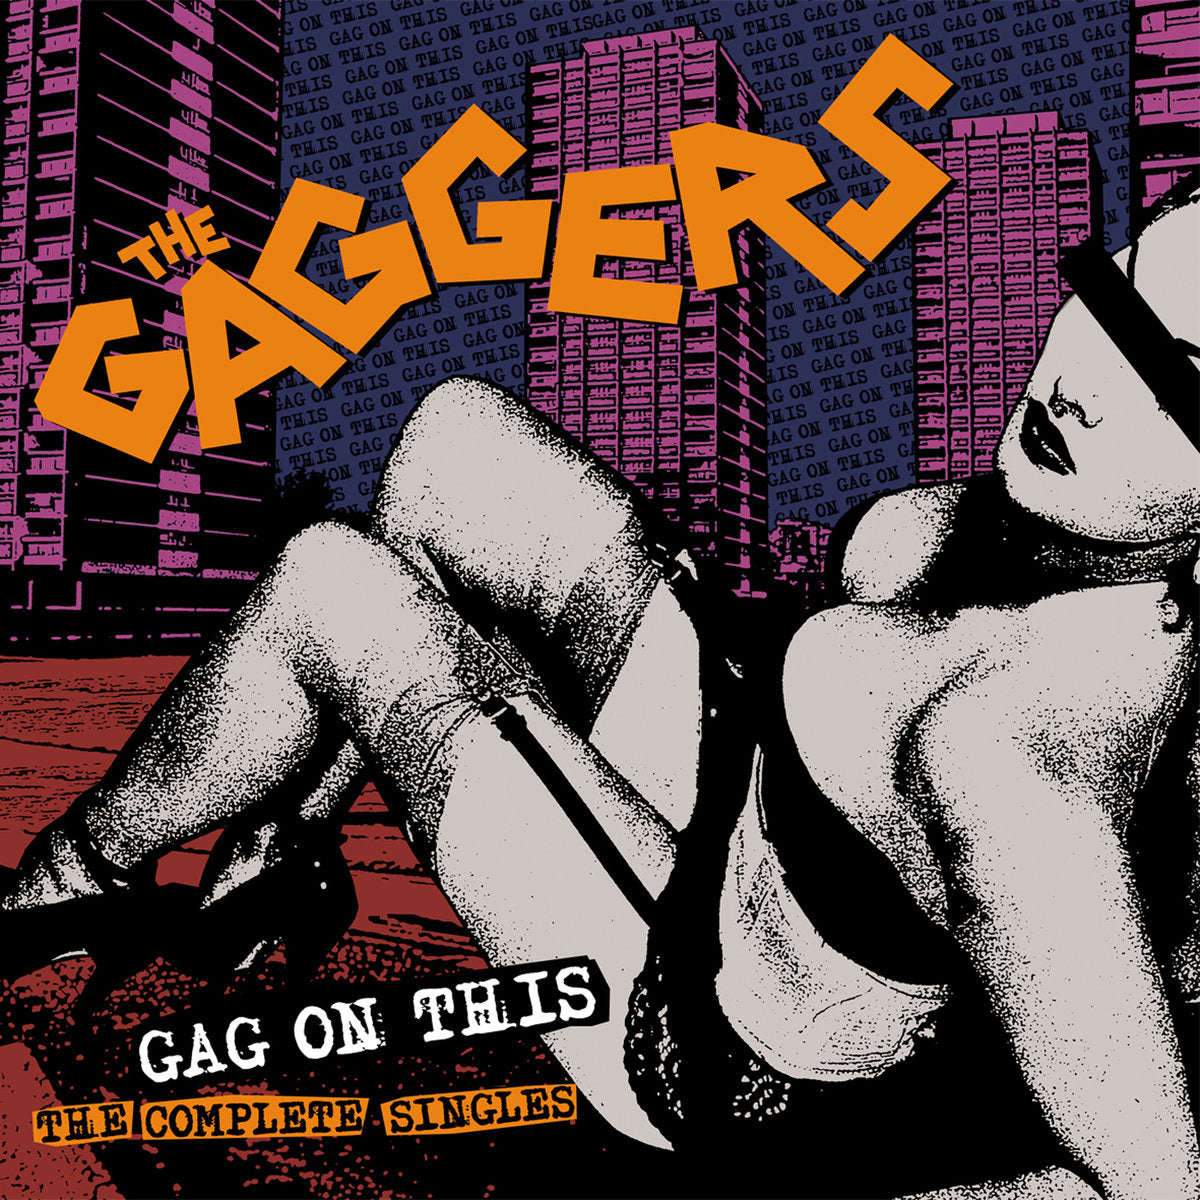 Gaggers- Gag On This 2xLP ~DELUXE REISSUE W/ GATEFOLD COVER!